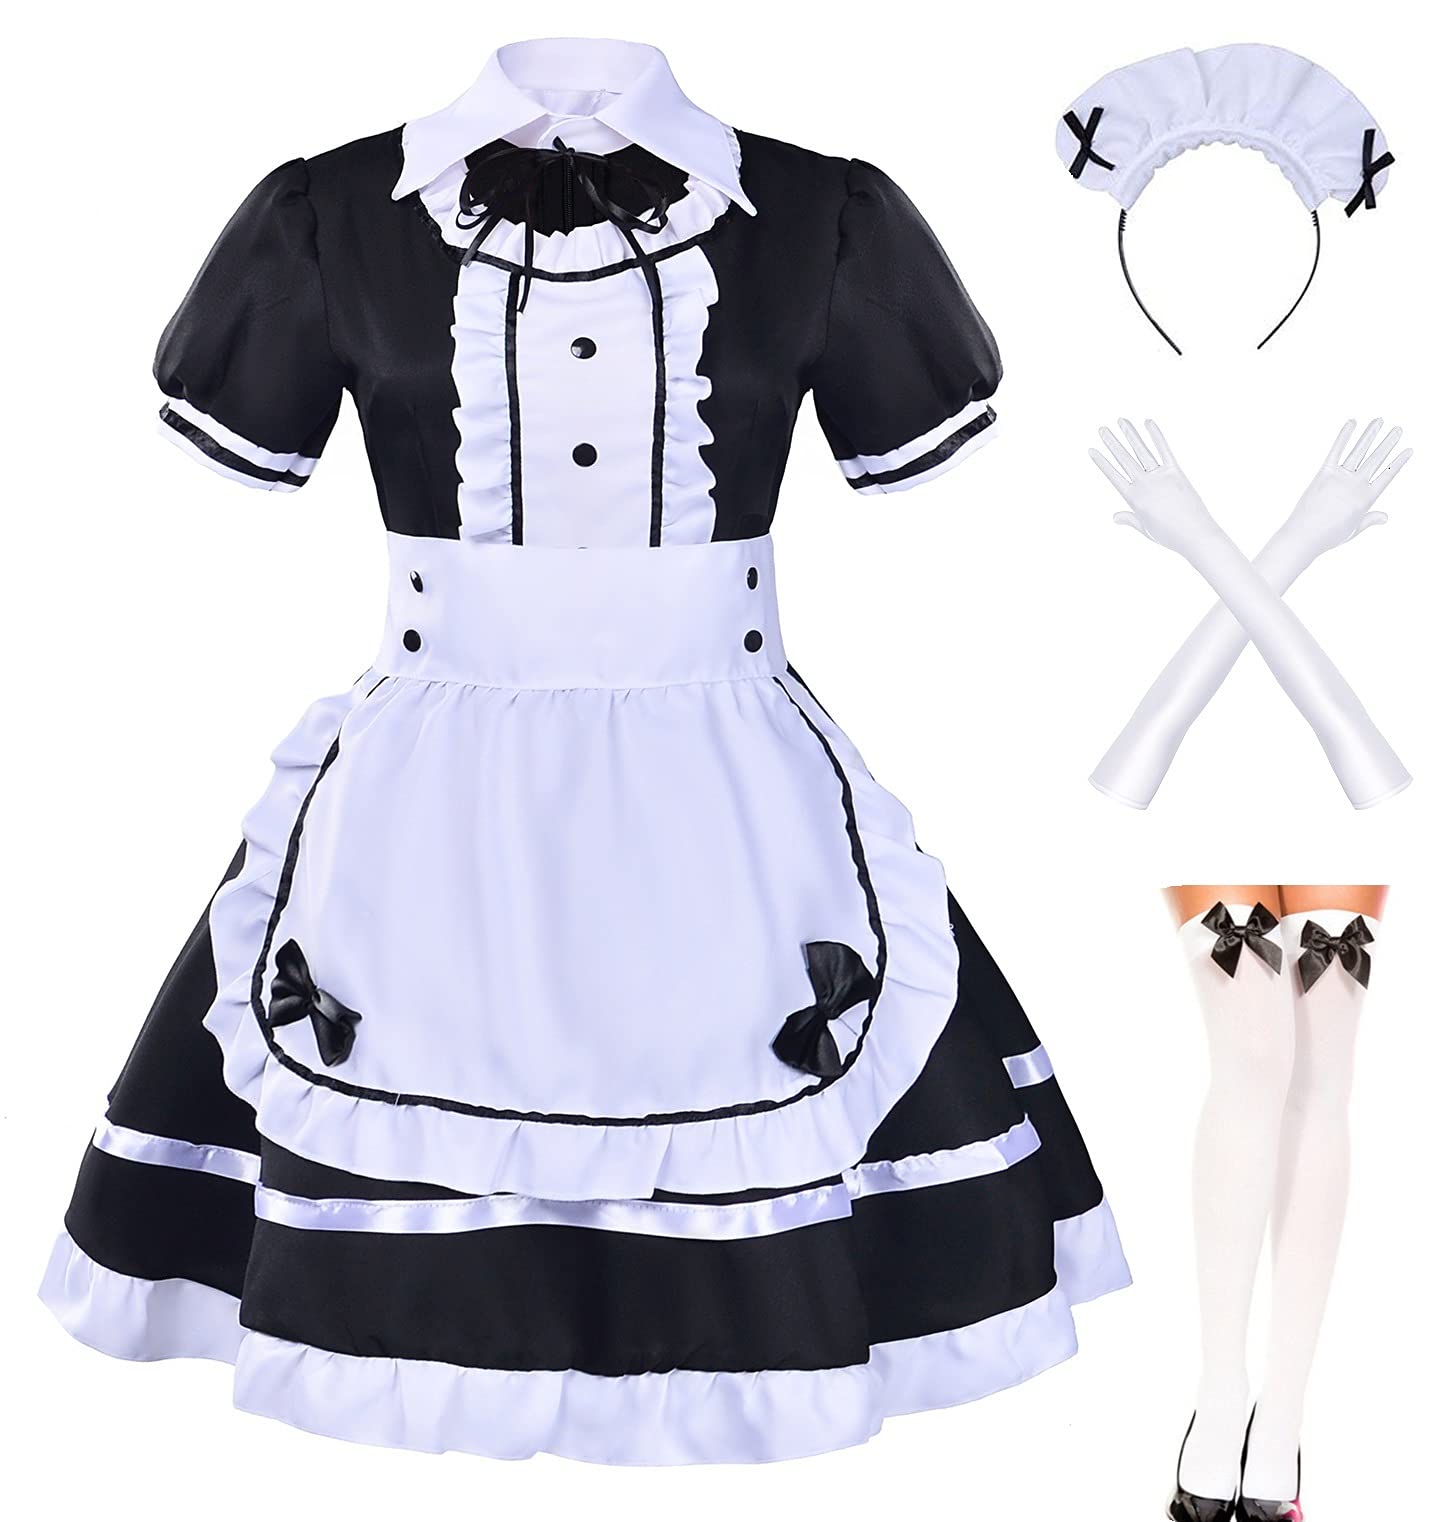 Wholesale Anime Lolita Maid Outfit Cosplay Cute Costume Black Dress Girls  Women Men Lolita Dresses Waitress Maid Party Stage Costume From  m.alibaba.com